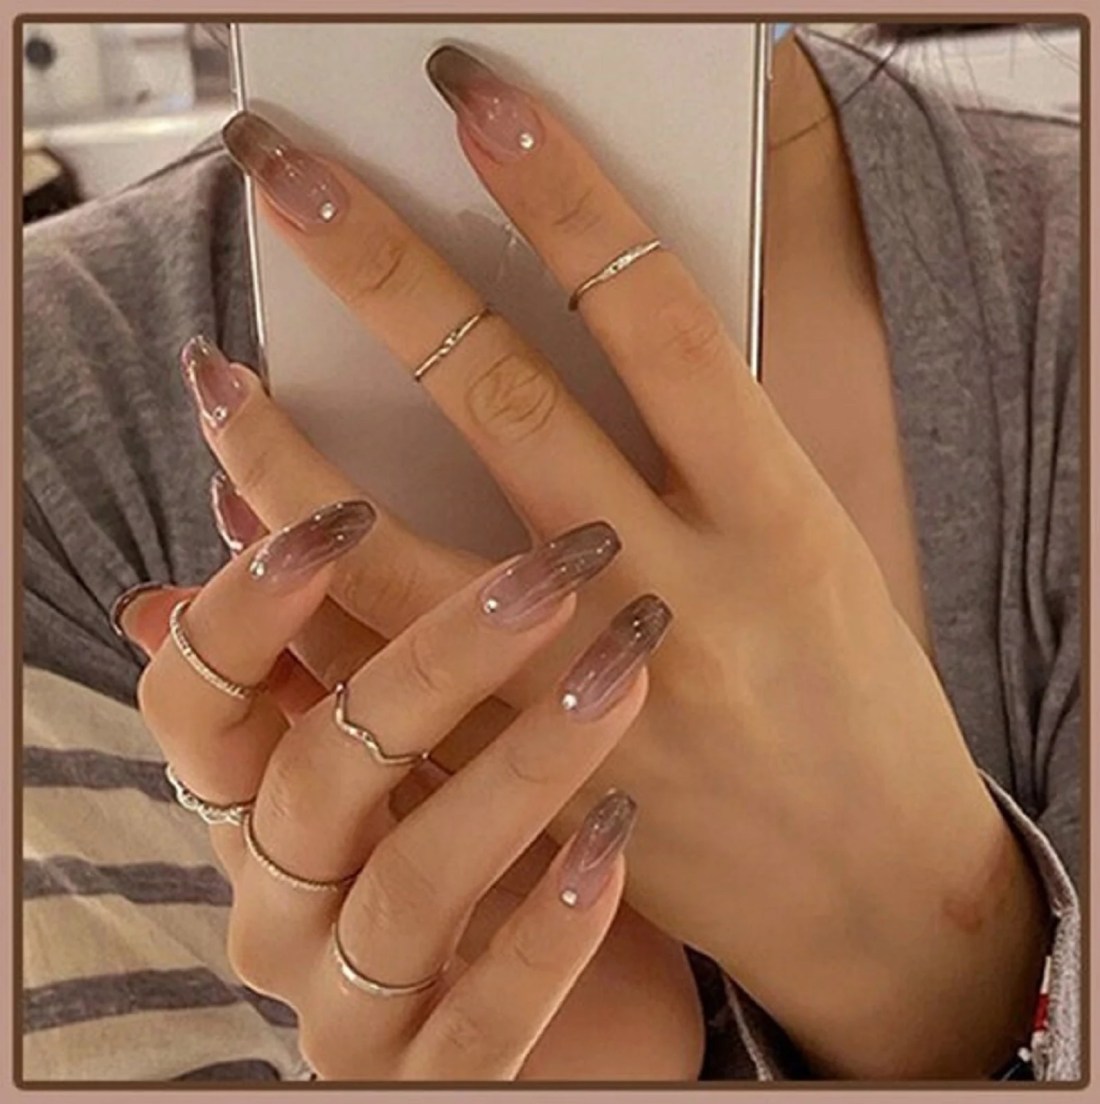 A woman with long nails and rings on her fingers. - Nails